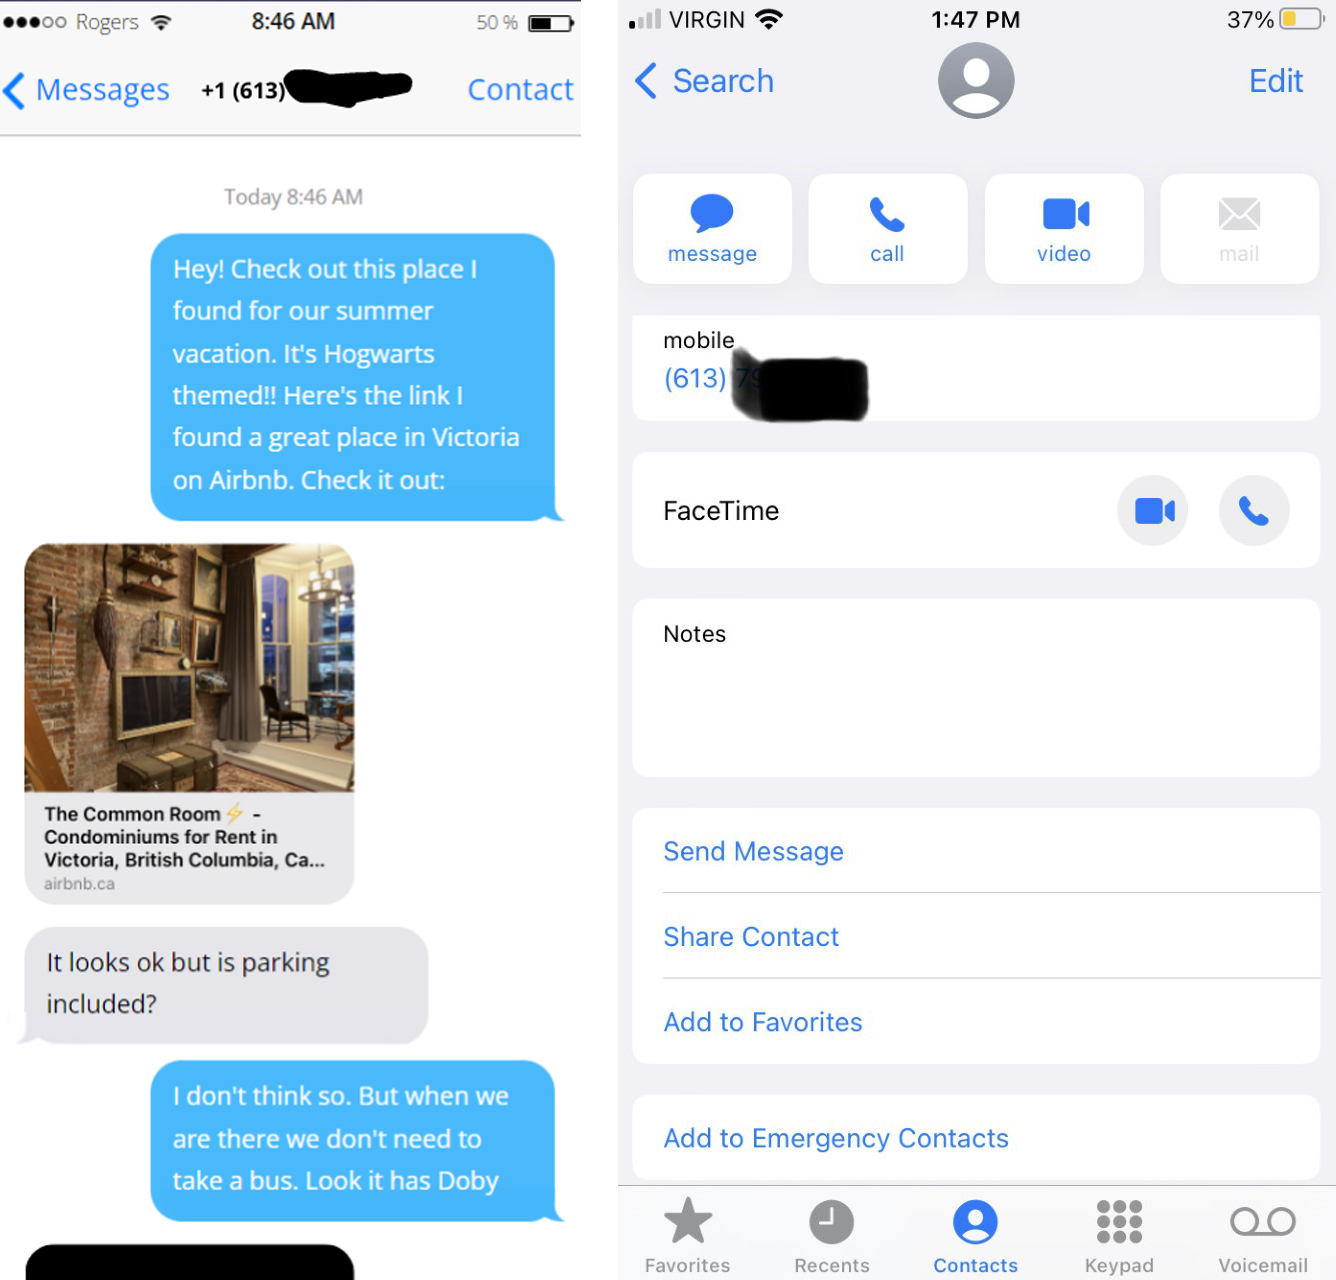 Delete the person’s name from the contact list before taking screenshots so that their phone number shows up in the messages rather than the name you have assigned to them